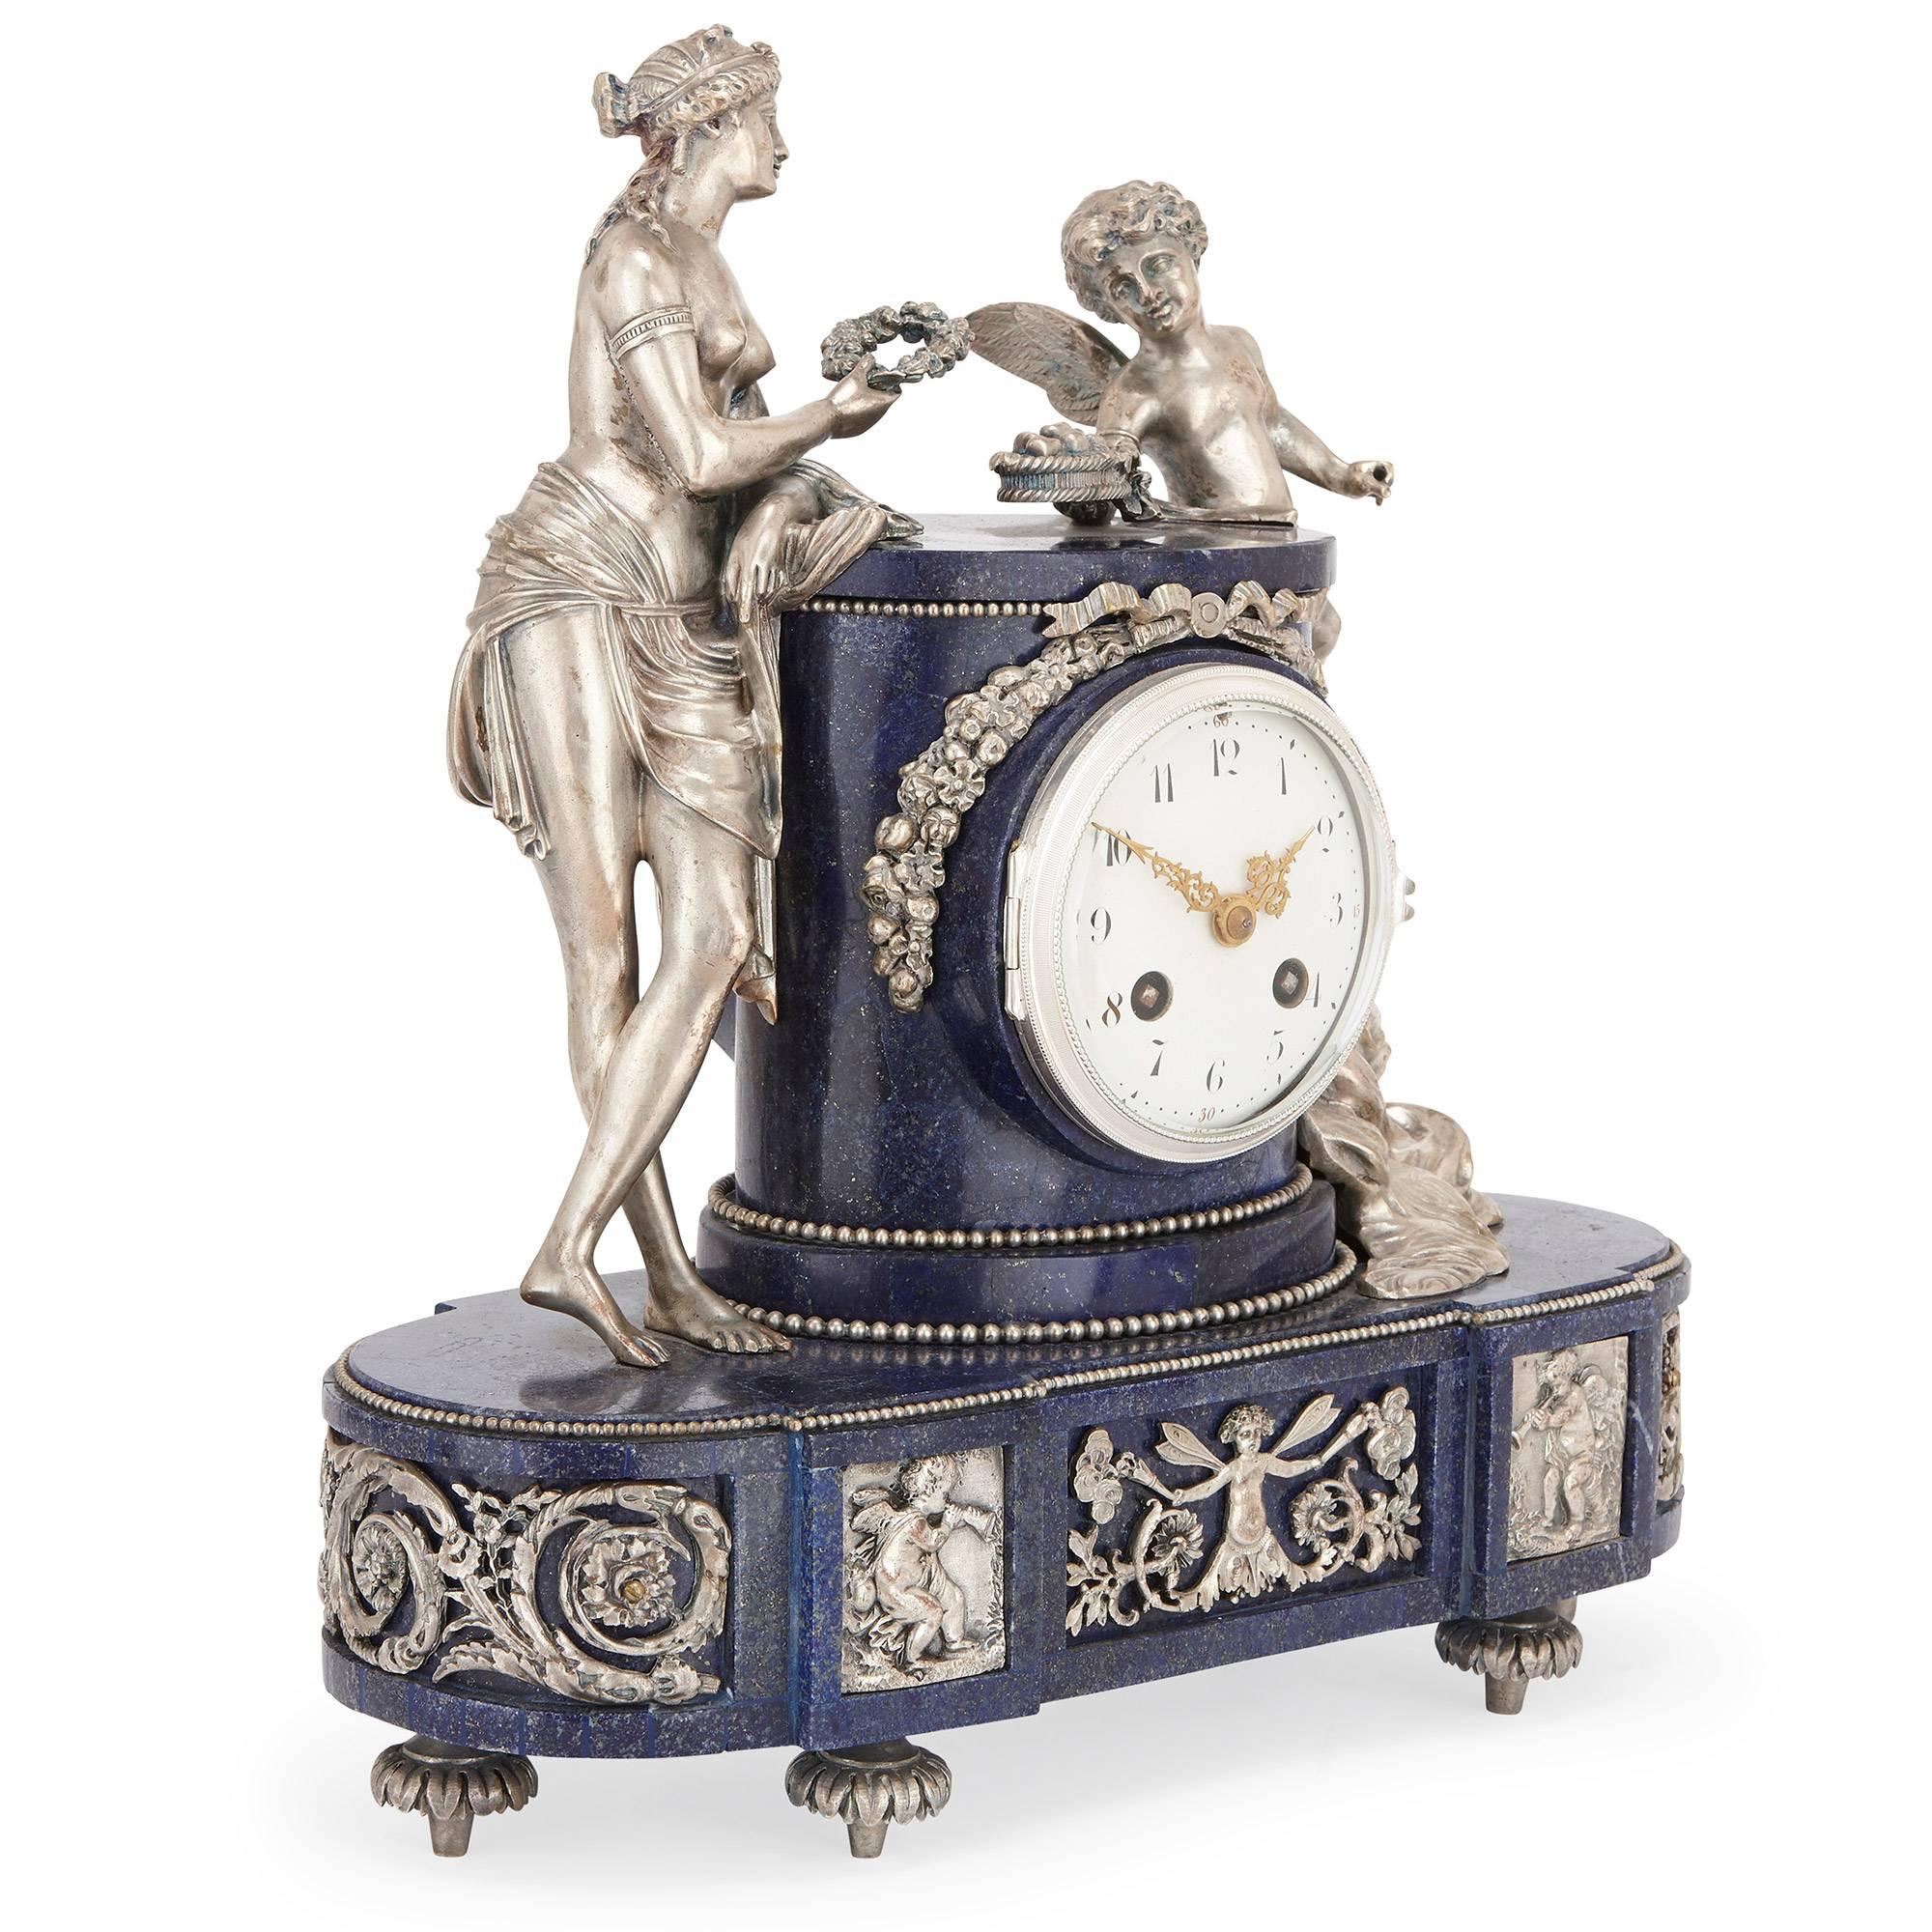 This beautiful antique three-piece French clock set is comprised of a central clock and a pair of flanking candelabra. 

The central clock features a circular central dial surrounded by a lapis lazuli case and decorated with a silvered bronze